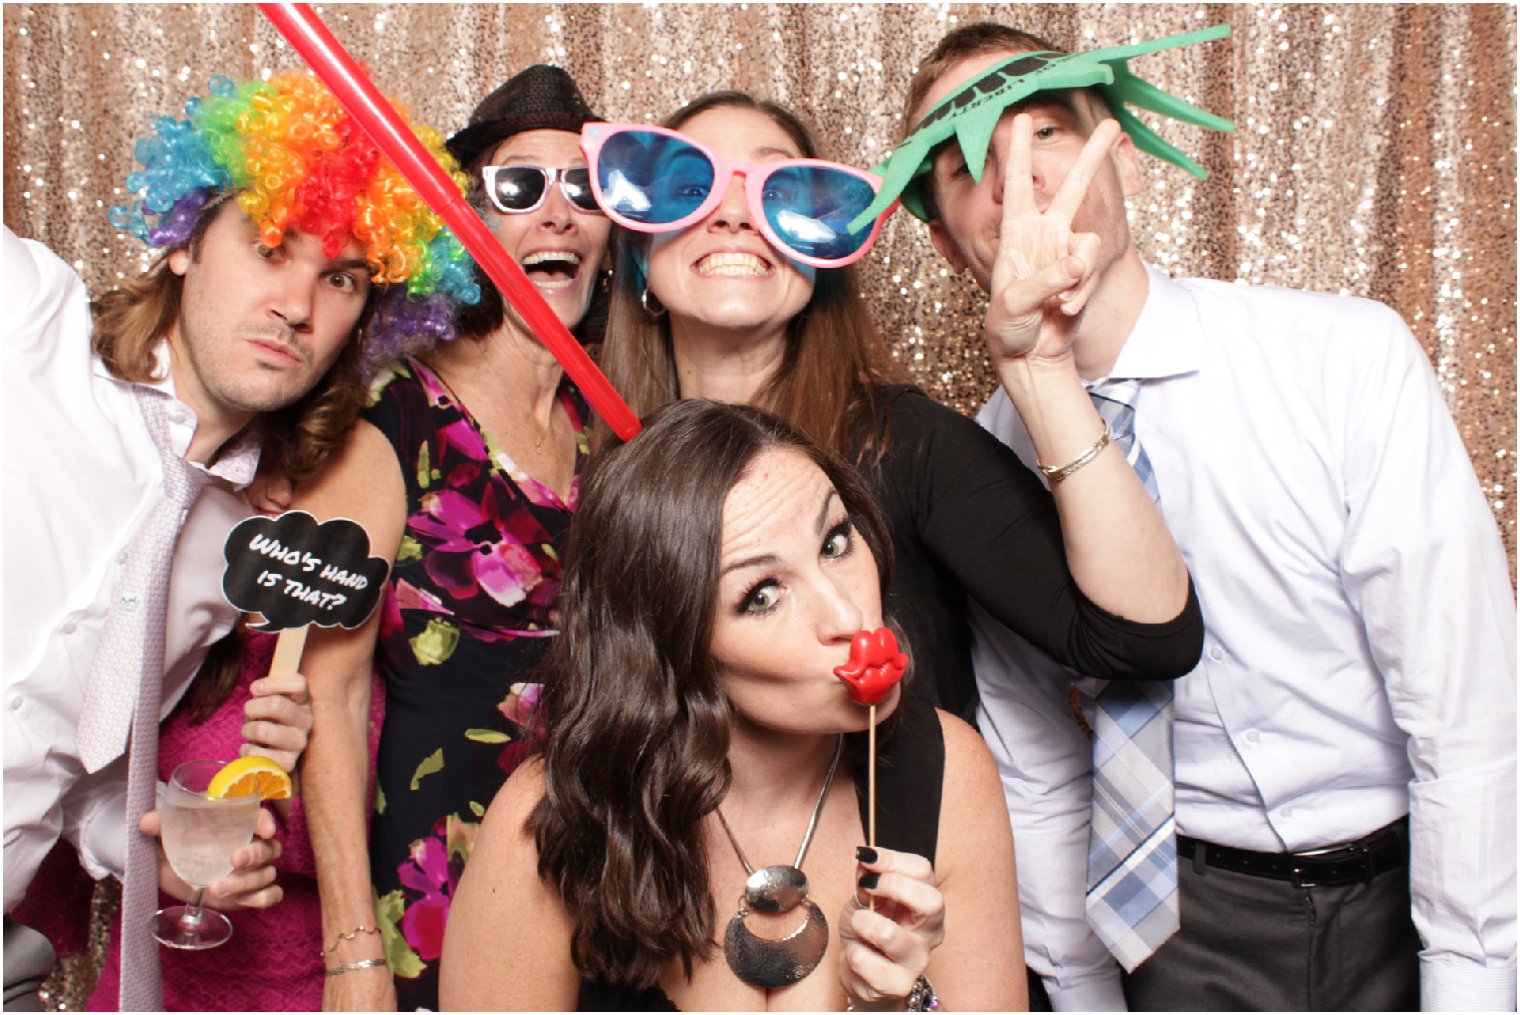 group photo of friends in the photo booth